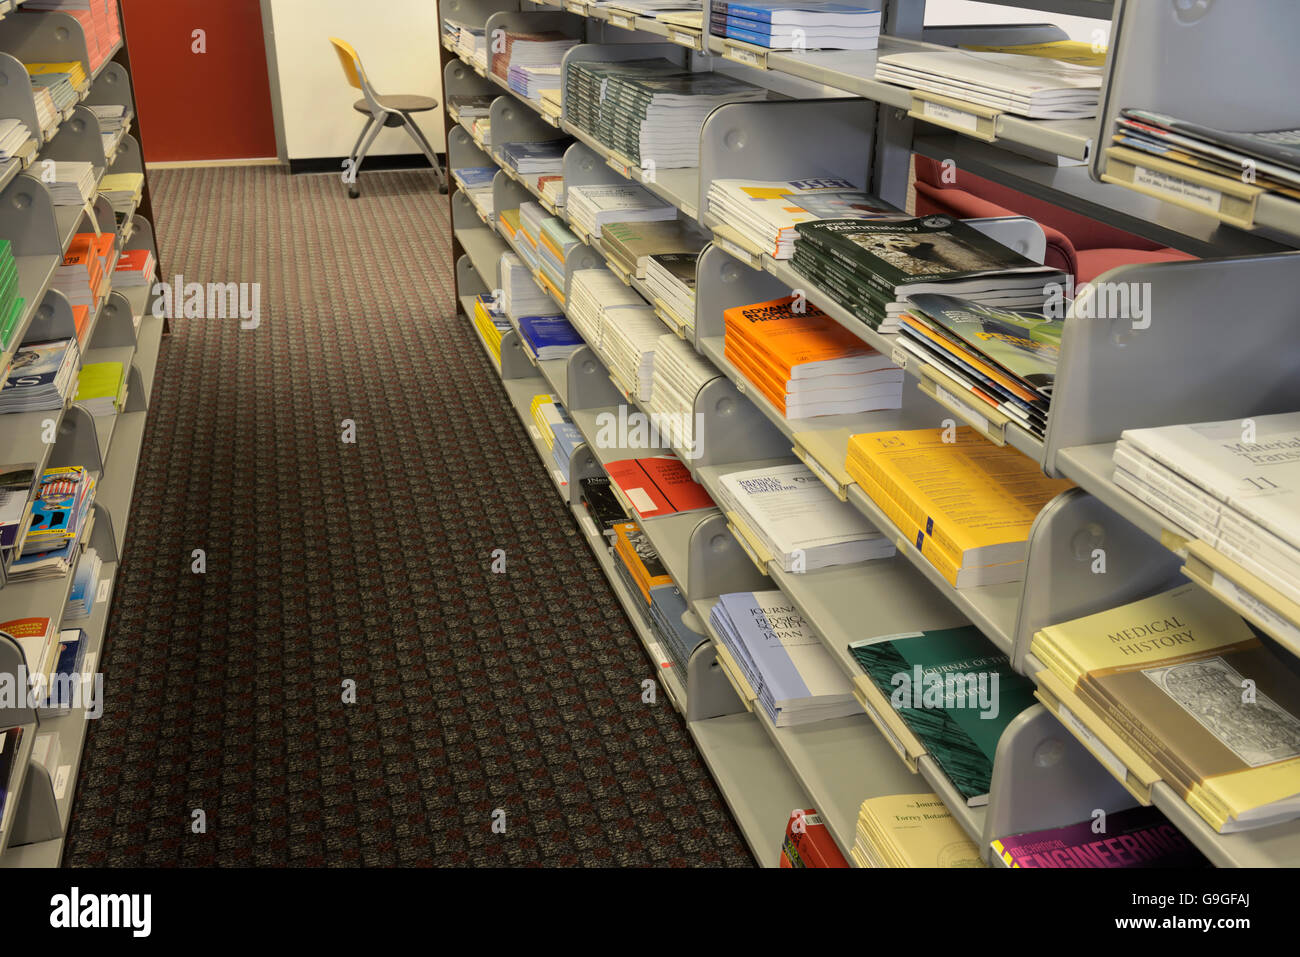 Journals, periodicals on shelves, at a university library Stock Photo